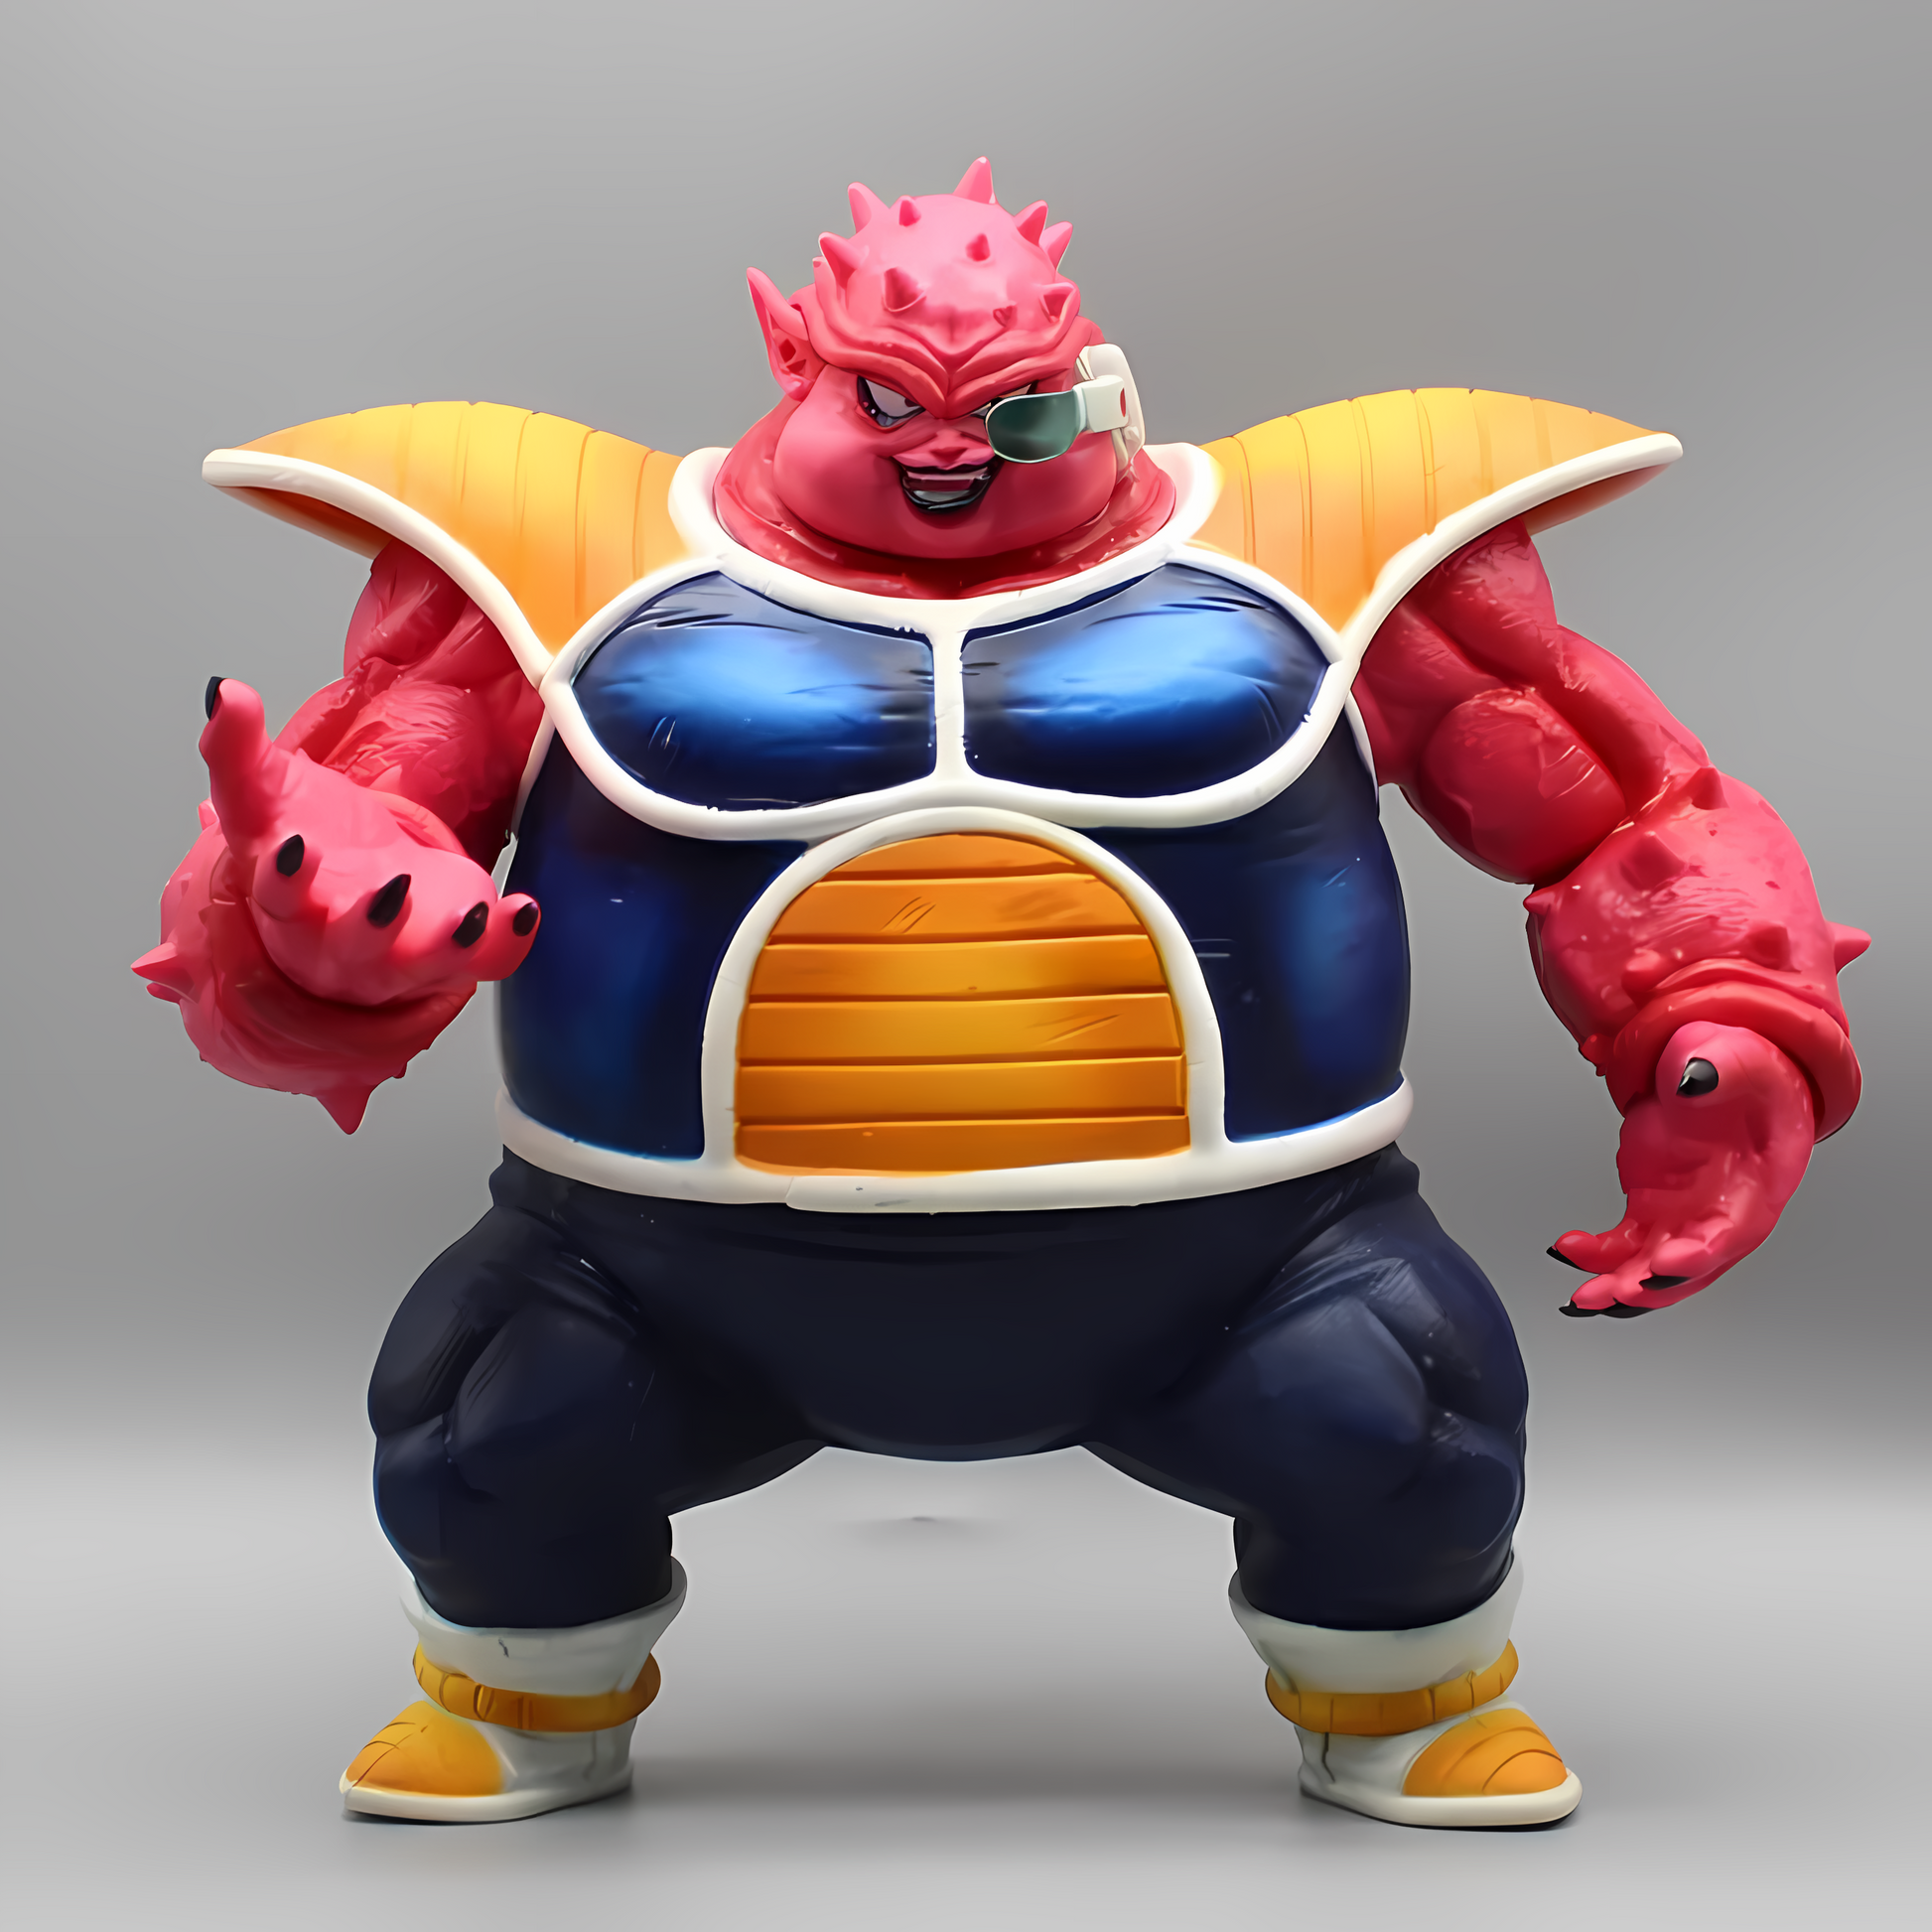 The Dragon Ball collectible figure Dodoria in a stance, with detailed red skin, wearing a blue and yellow armored suit, and a white cape, against a grey background.